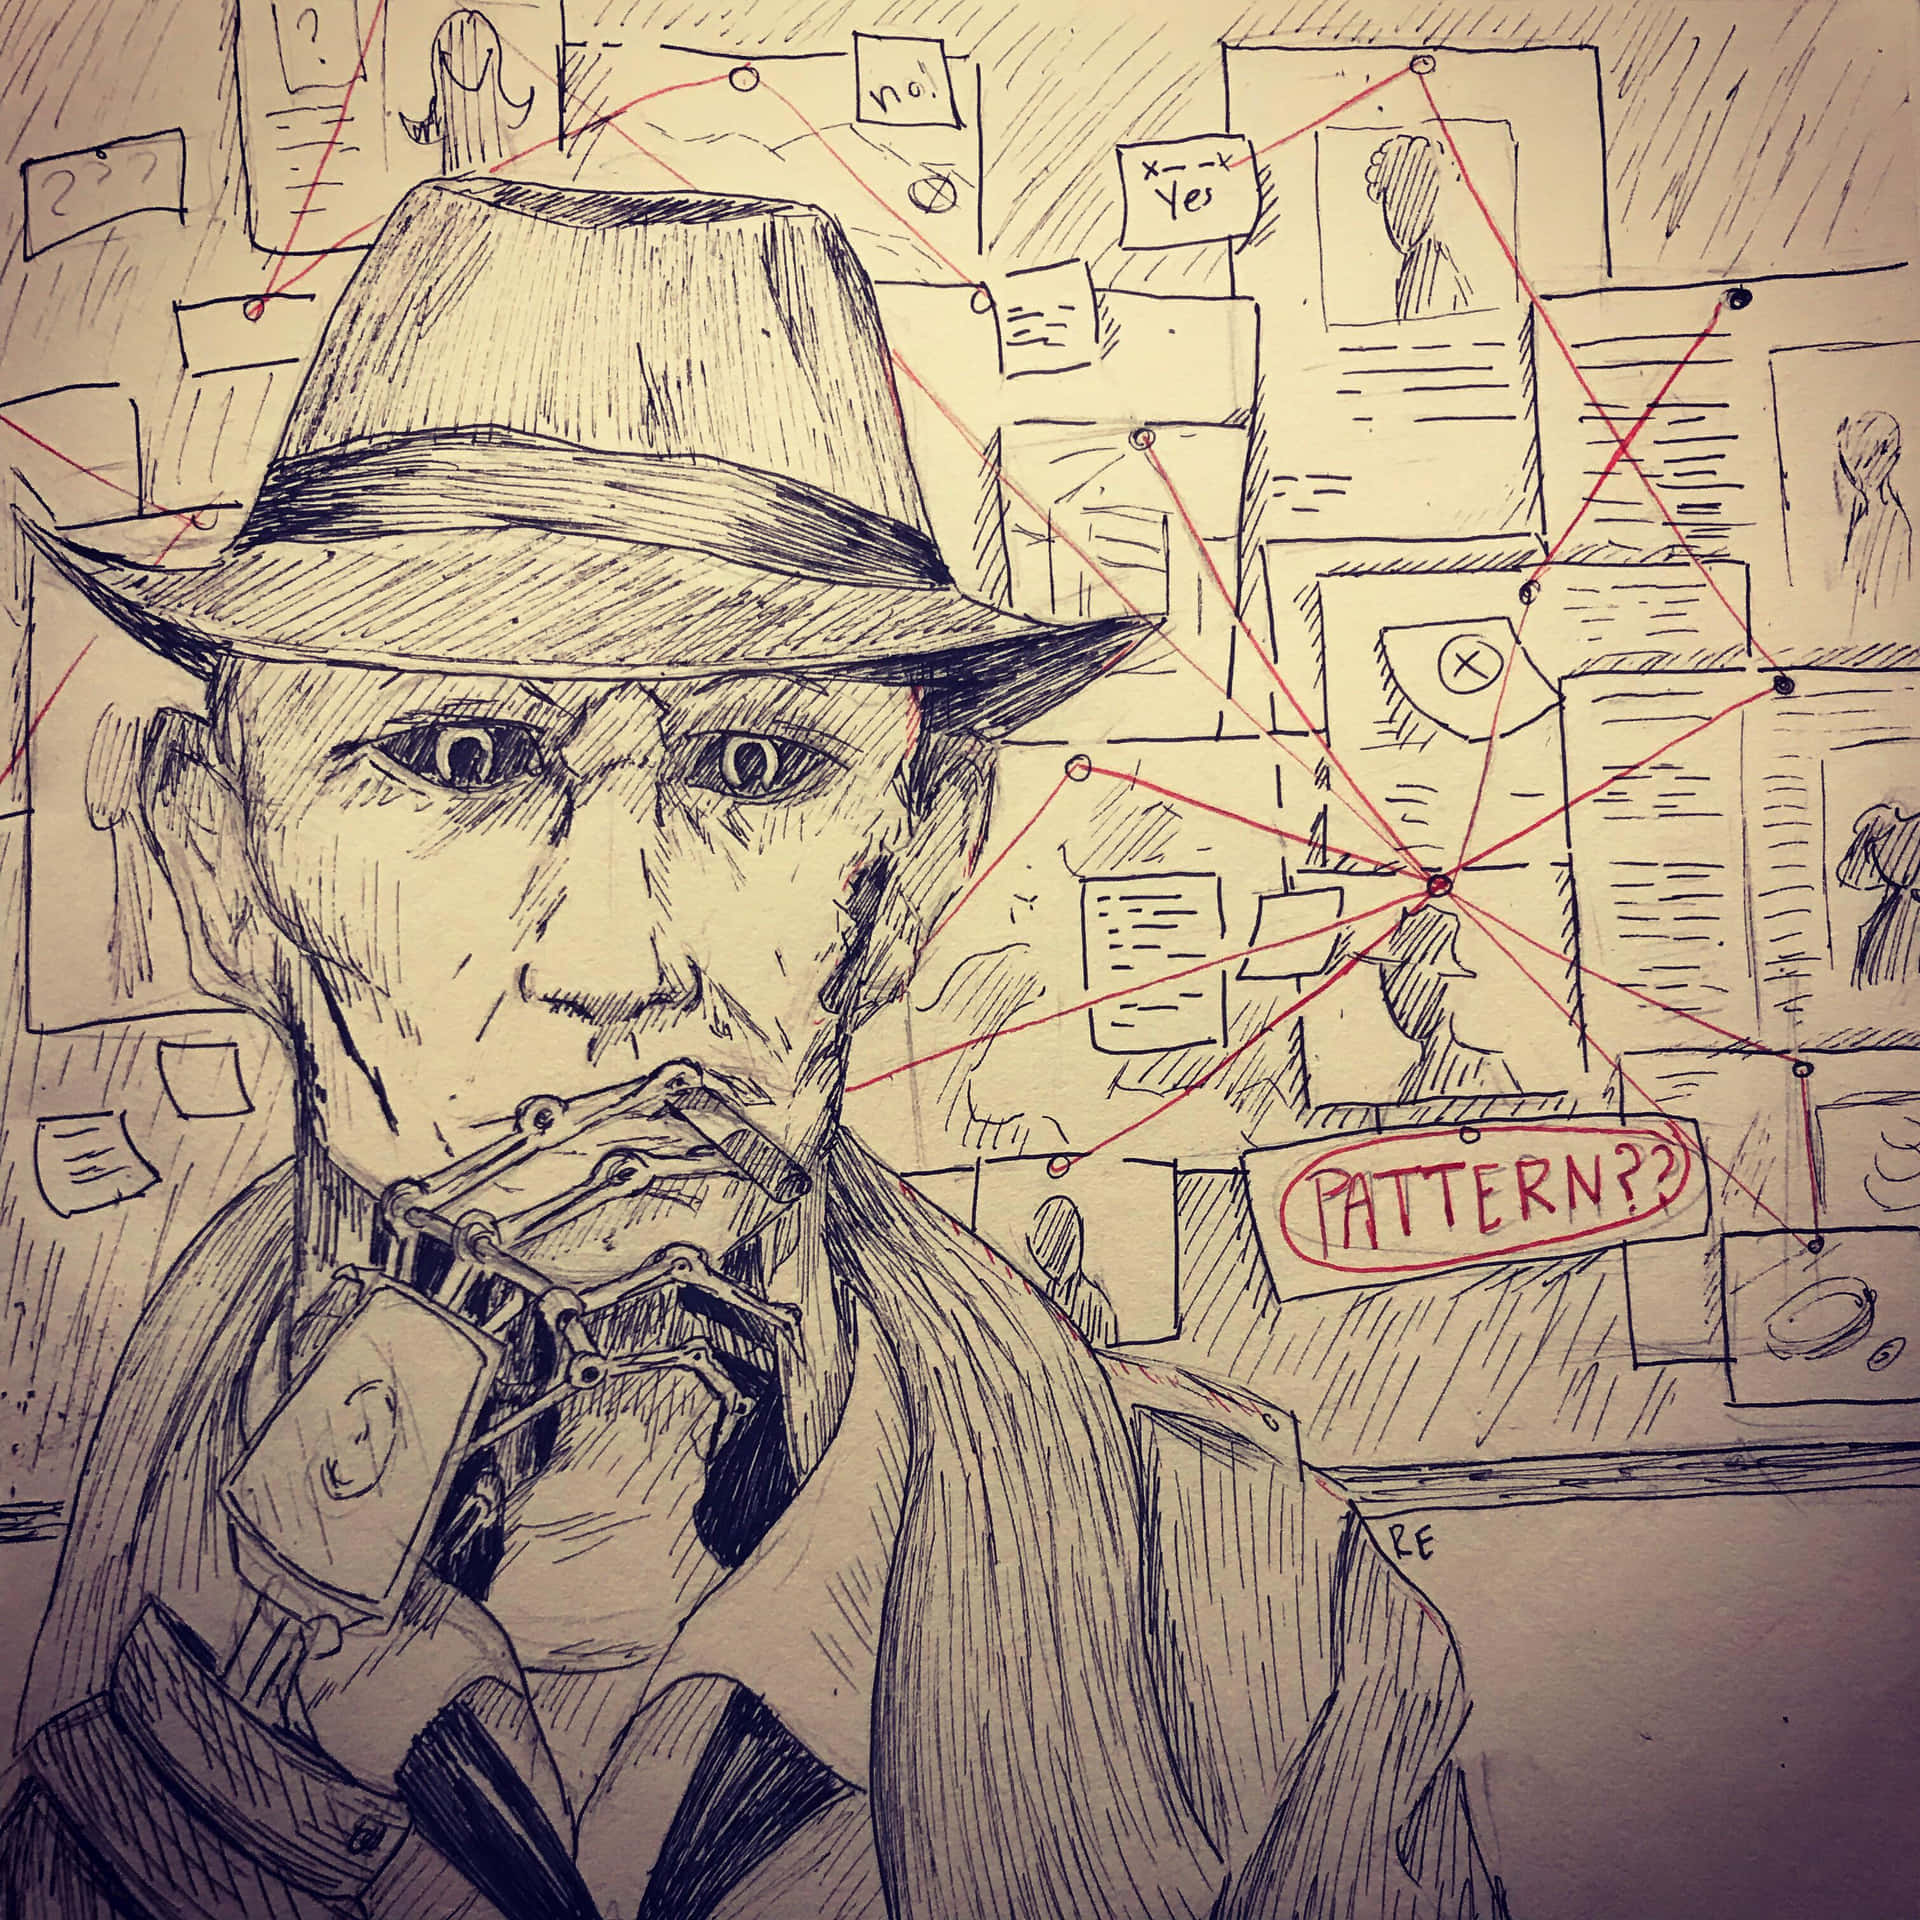 Nick Valentine, the Synth Detective of the Commonwealth Wallpaper